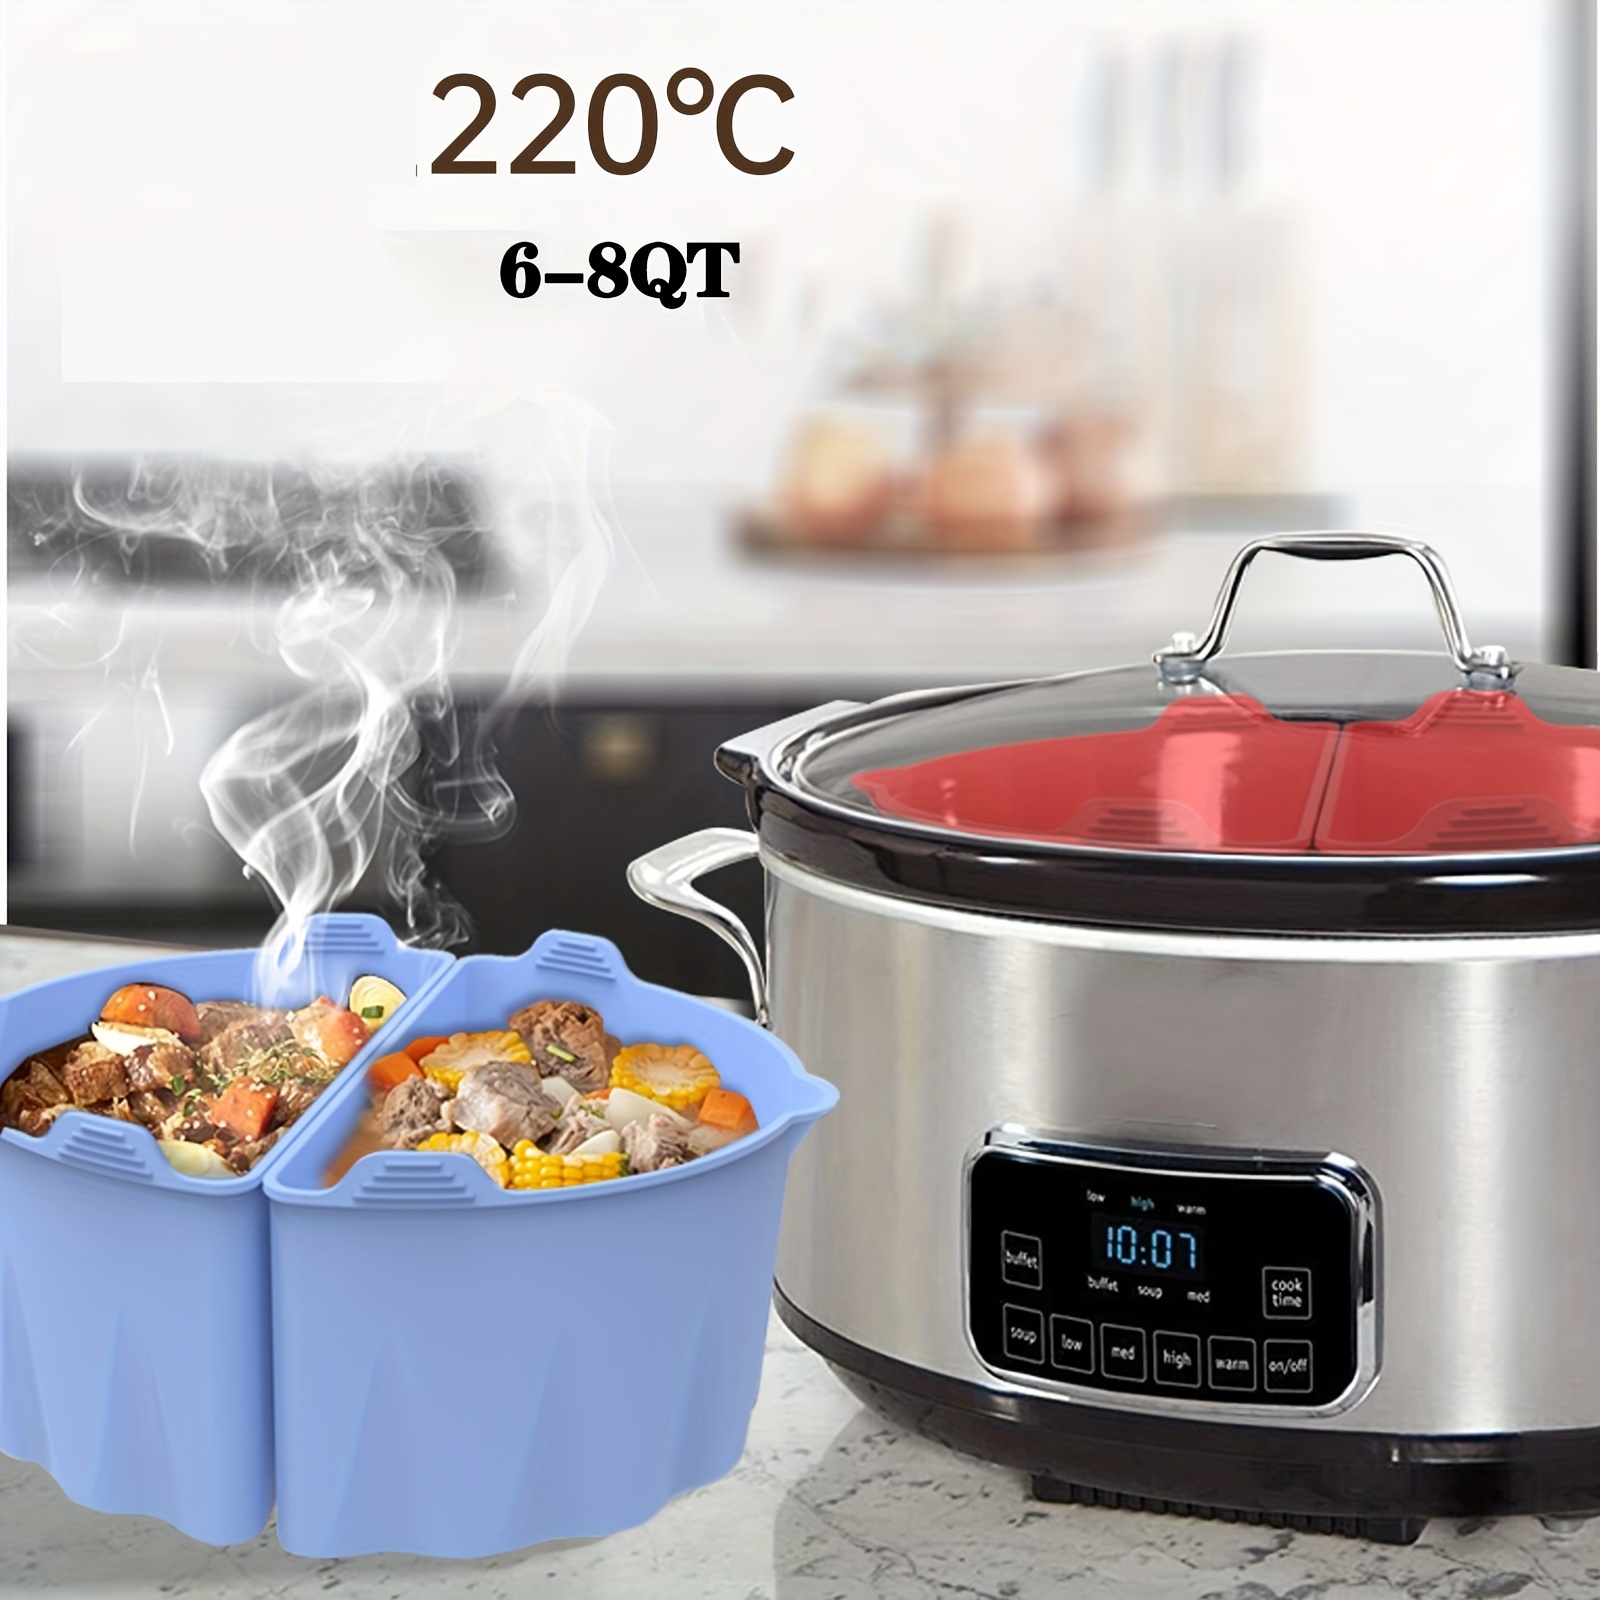 KOOC - Small Slow Cooker - 2 Quart, Red, with Free Liners